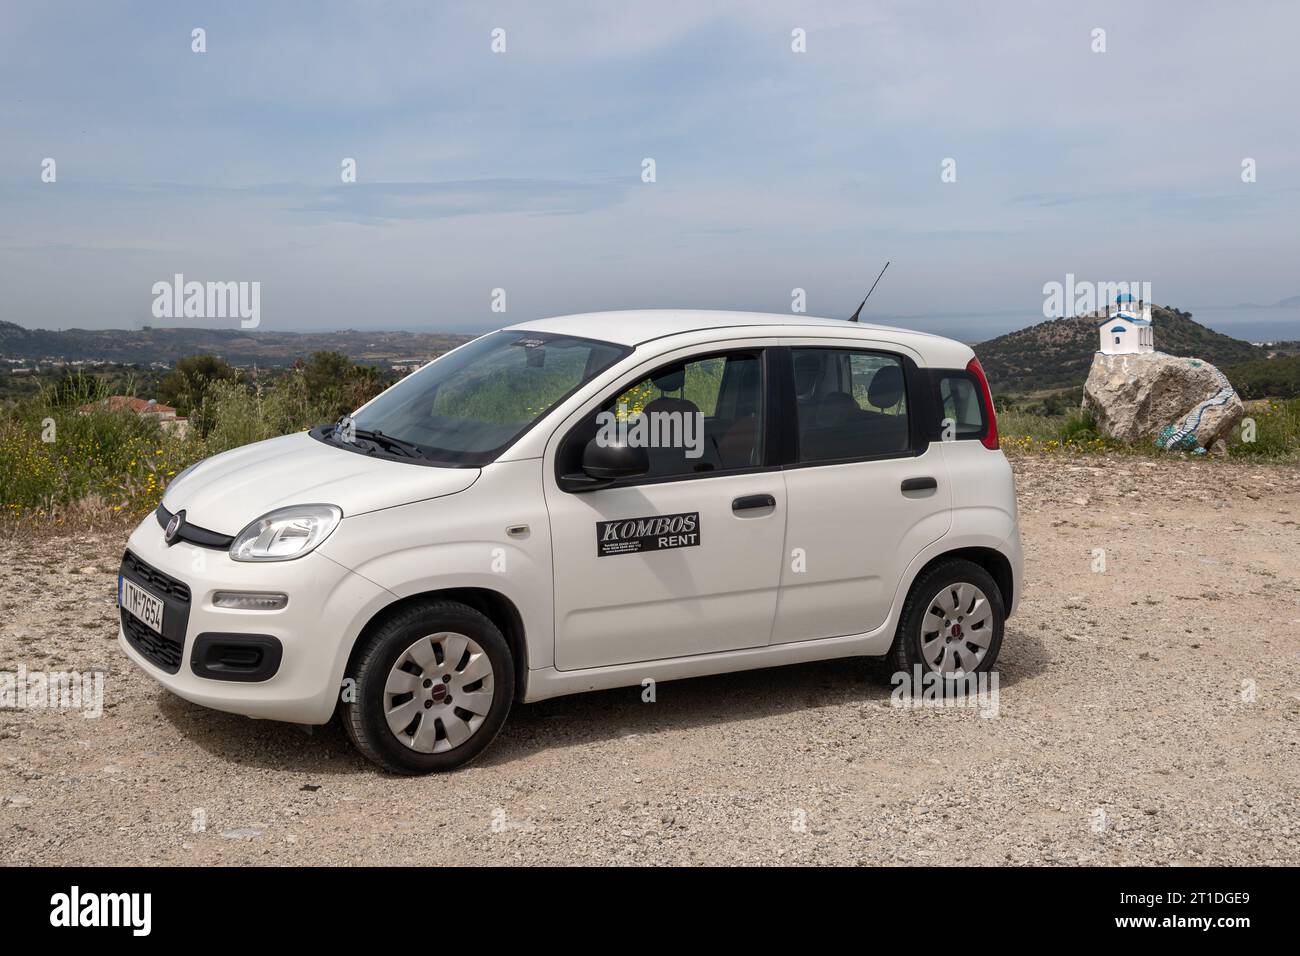 Kos, Greece - May 9, 2023: Fiat Panda parked on gravel road on the island of Kos in Greece Stock Photo